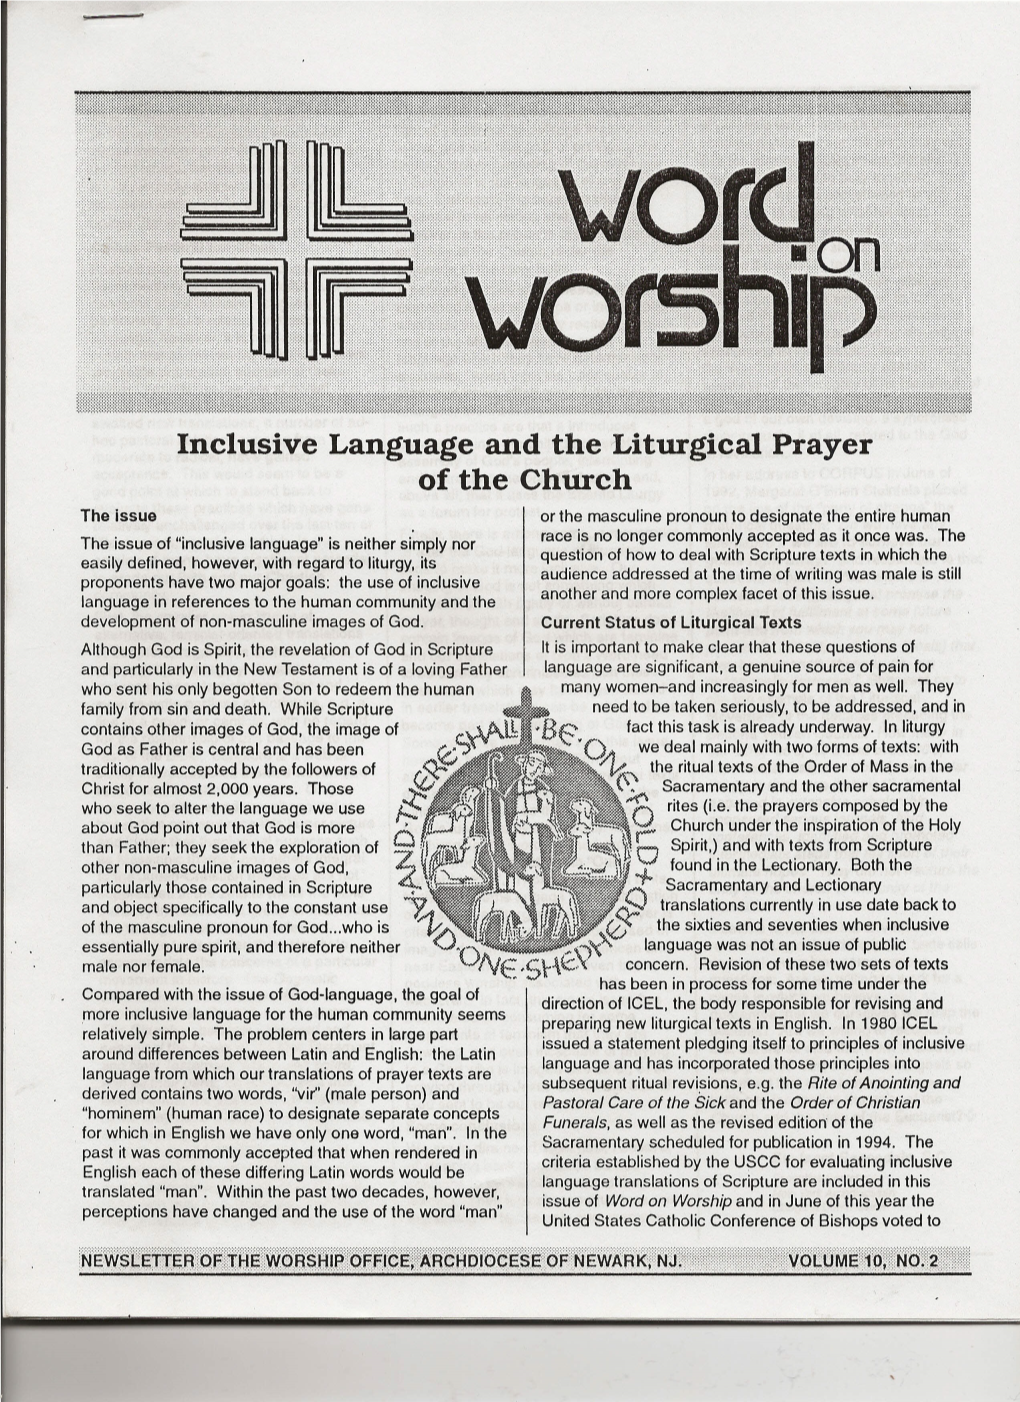 Inclusive Language and the Liturglcal Prayer of the Church